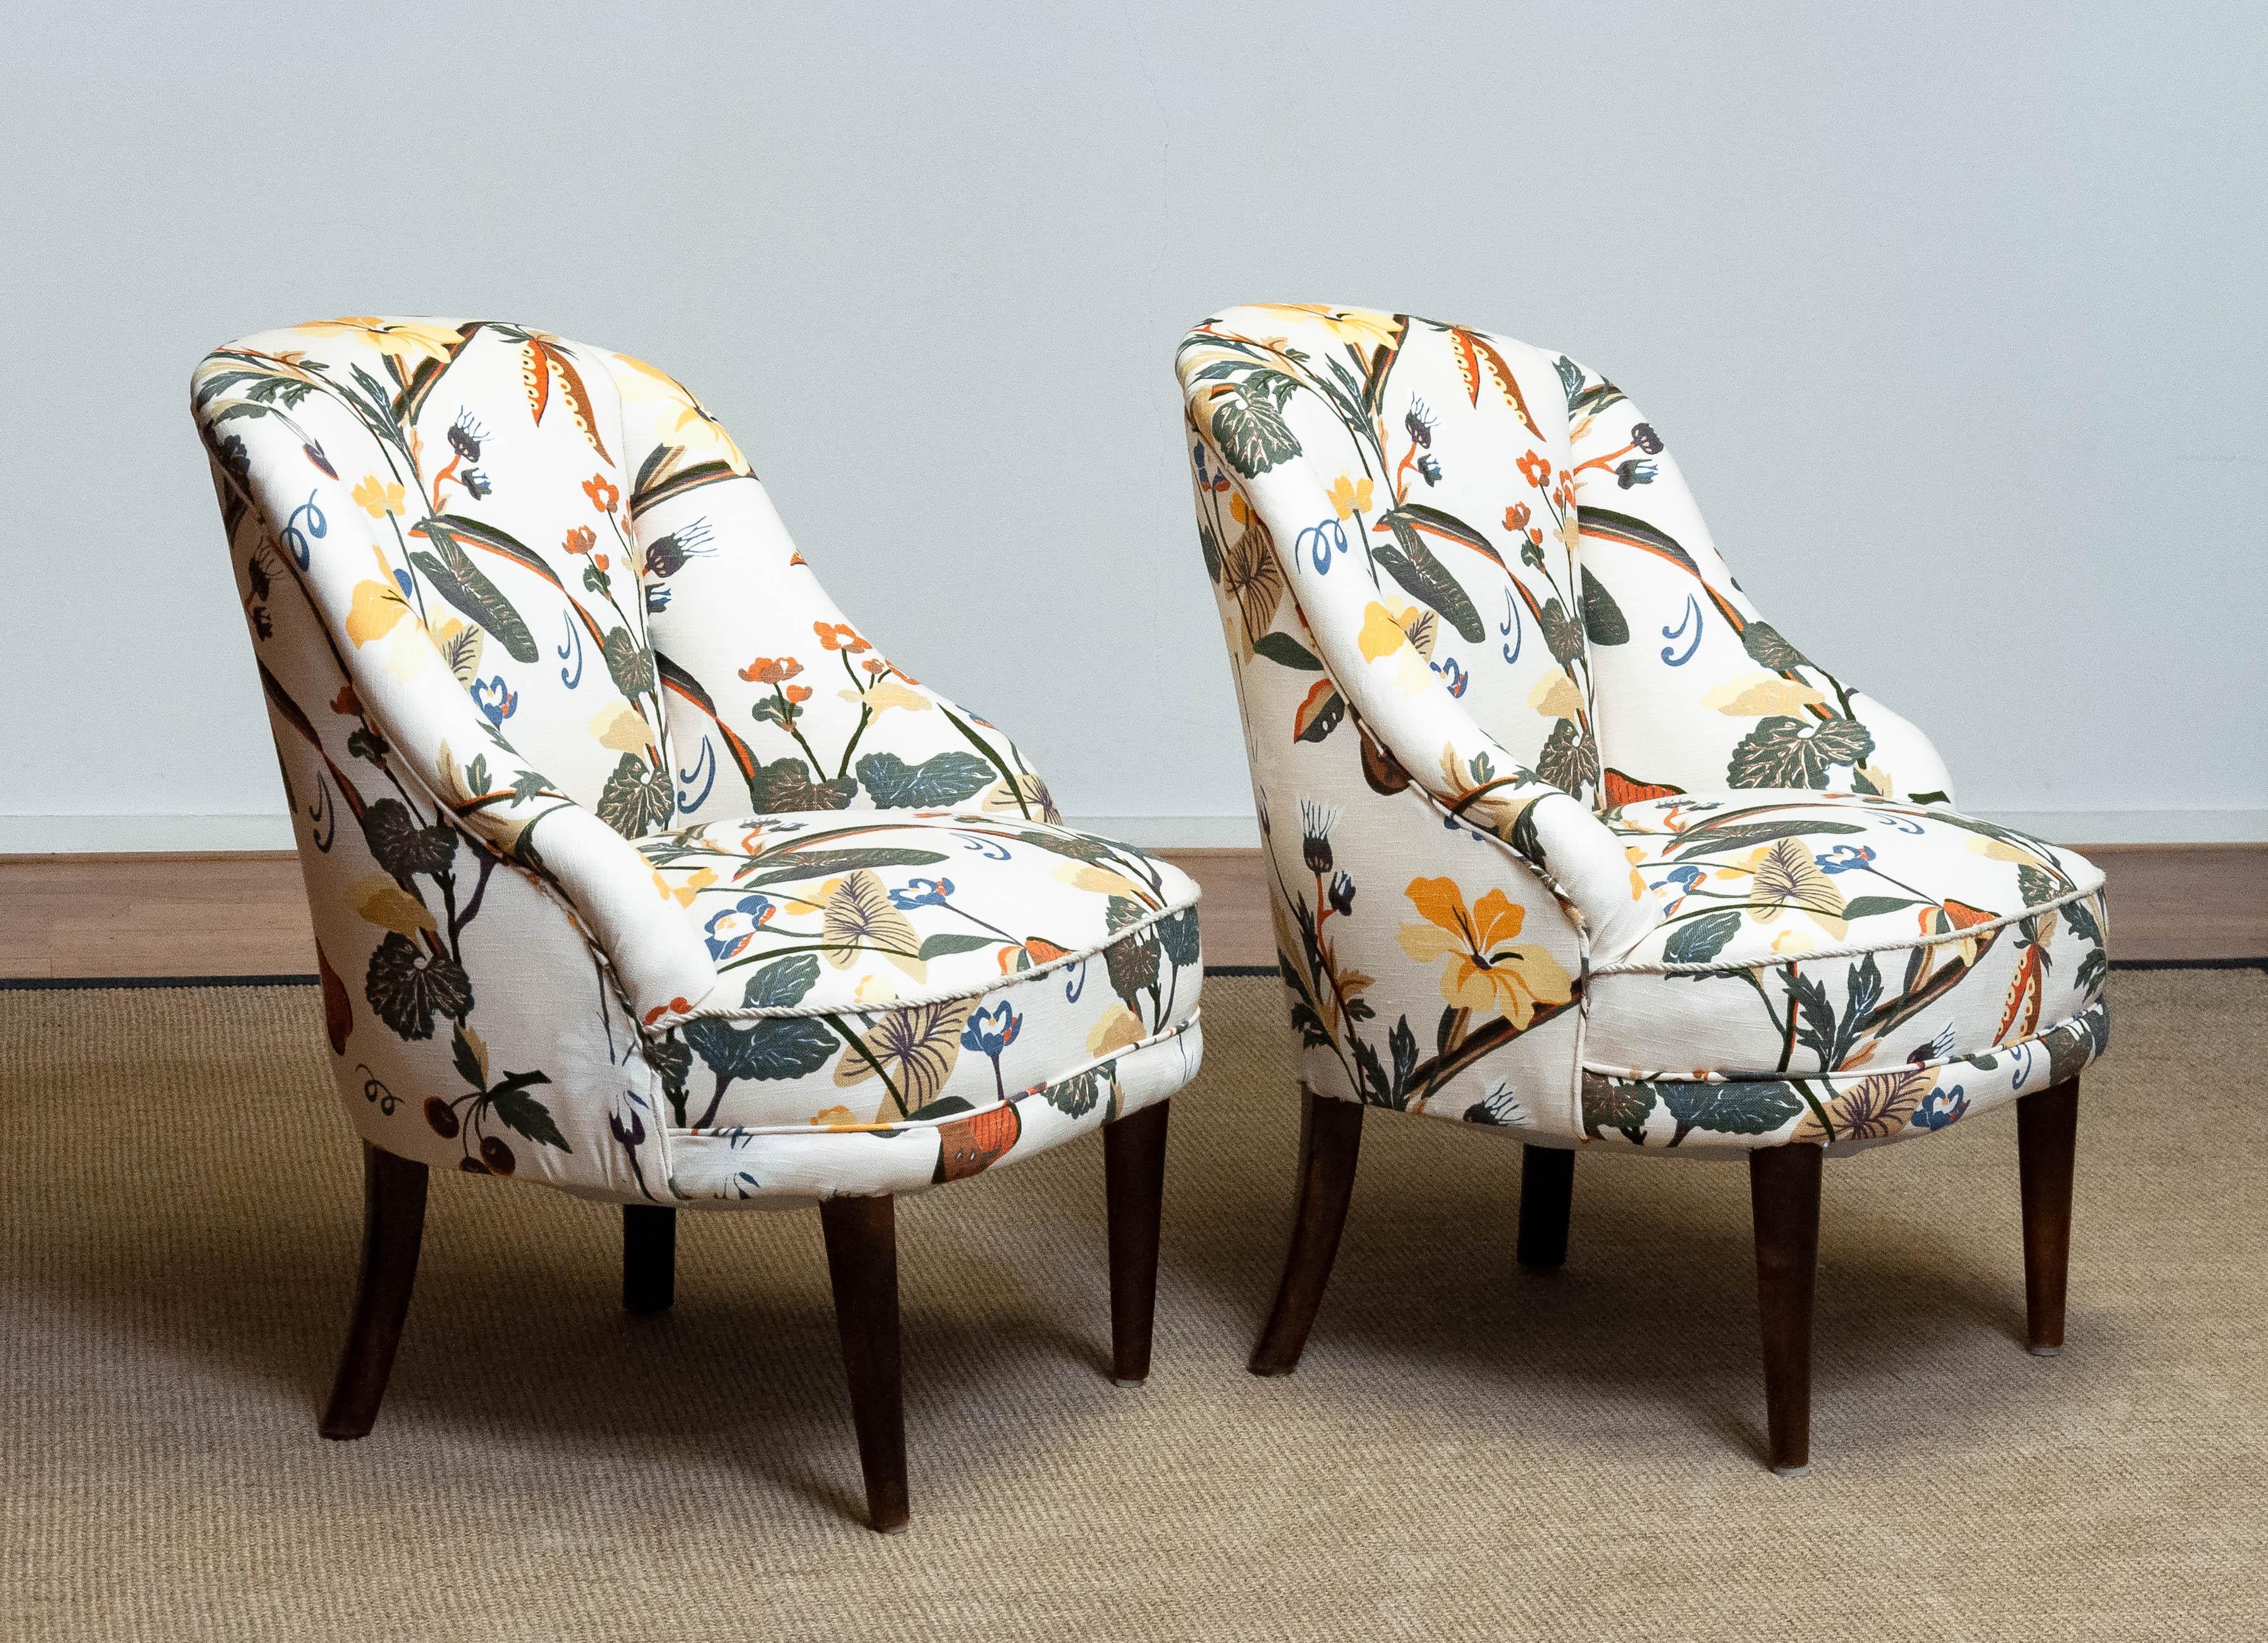 Pair Floral Printed Linen, J Frank Style, New Upholstered Danish Slipper Chairs In Good Condition For Sale In Silvolde, Gelderland